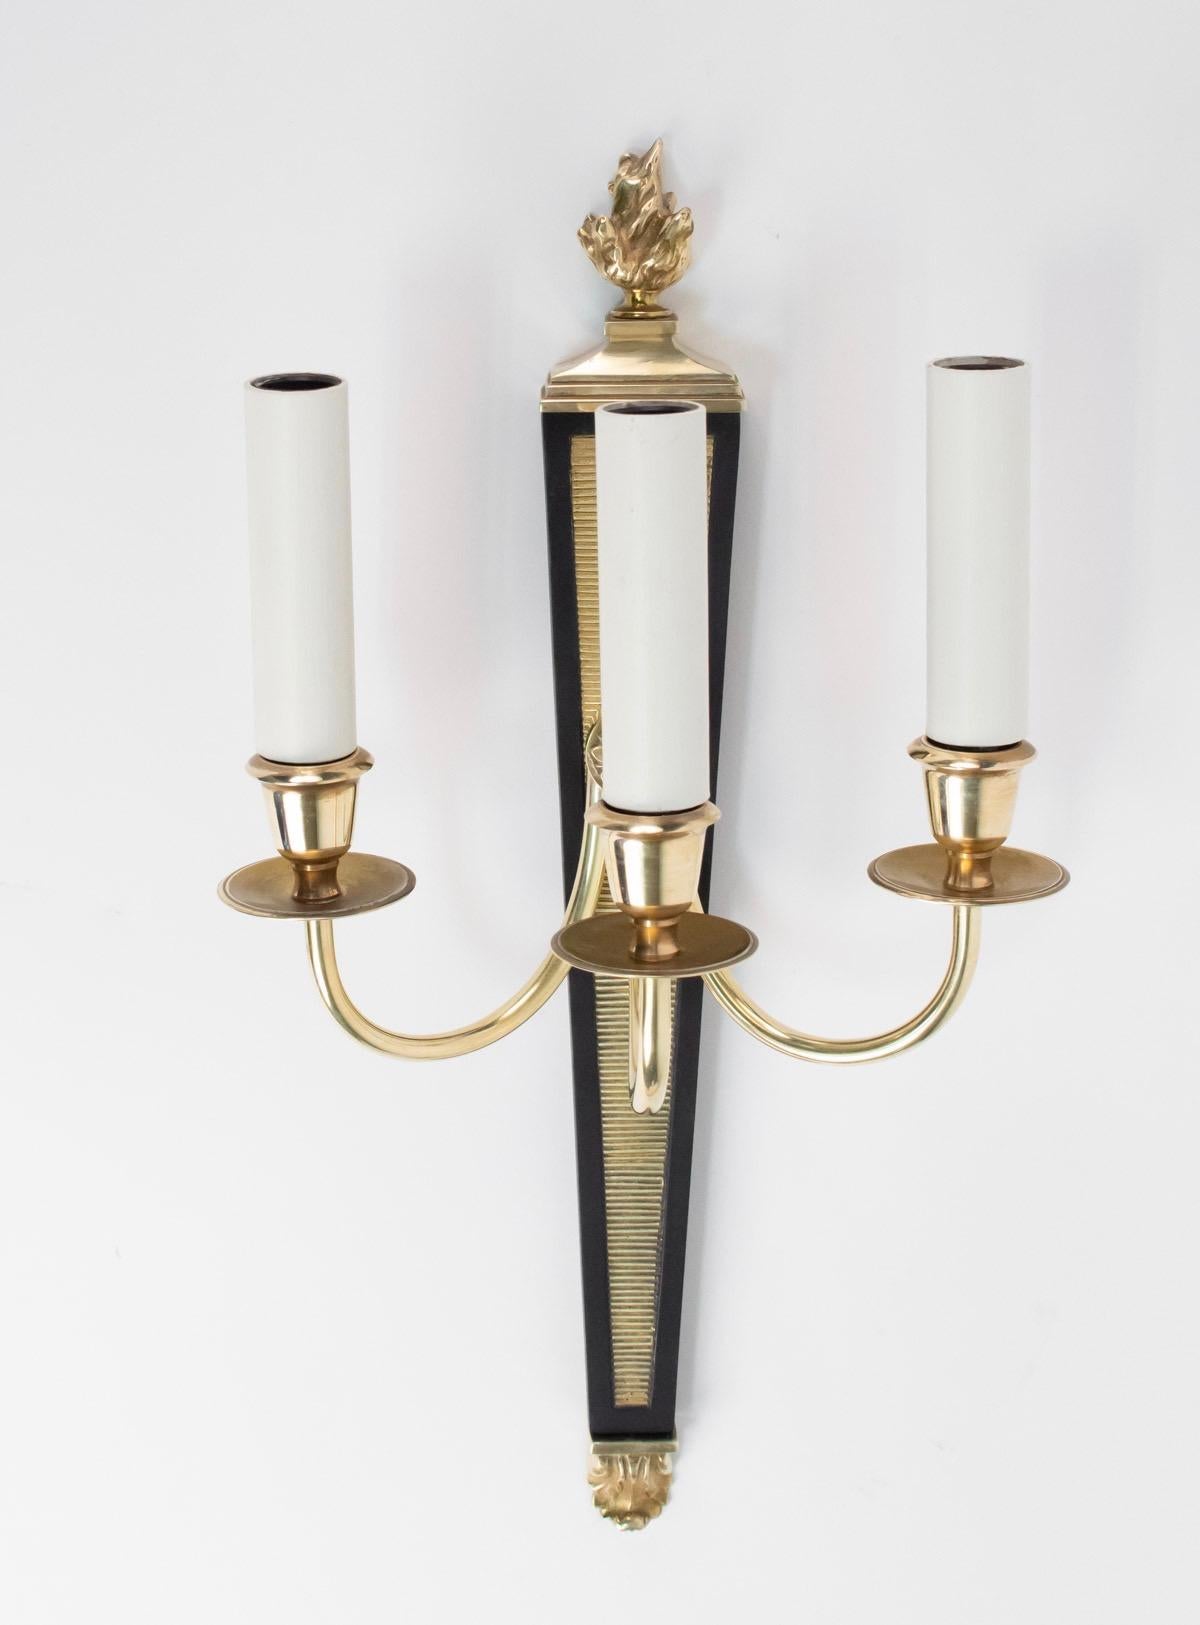 Elegant pair of Maison Charles sconces, France, 1960s.
Trapezoidal back plate made of blackened bronze adorned with fluted gilded bronze piece. The both extremities are ended stylized flames.
The three arms are made of brass and ended with a